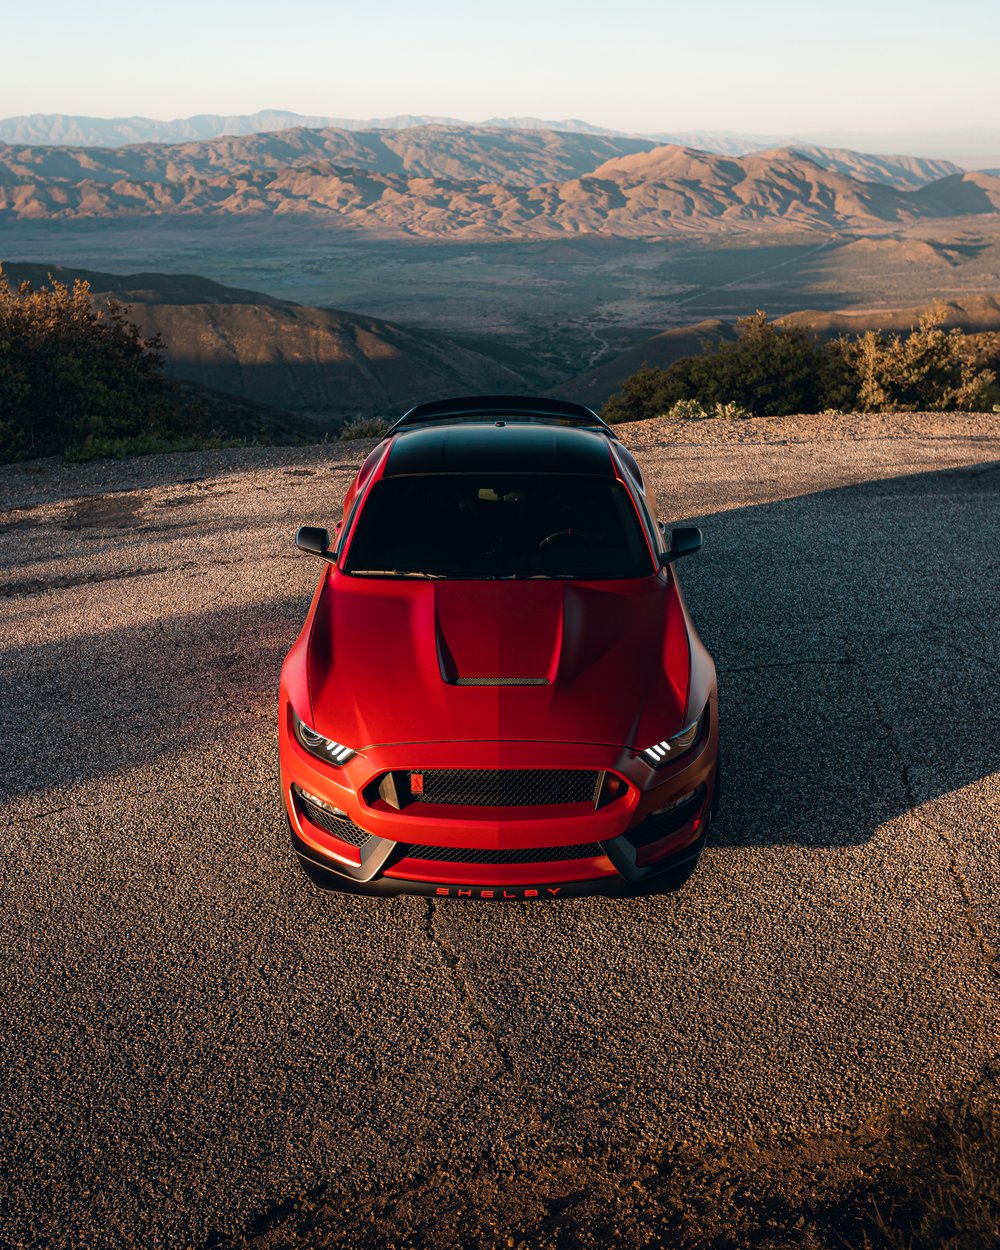 Andy's Mustang Shelby GT350R — McKenzie Johnson